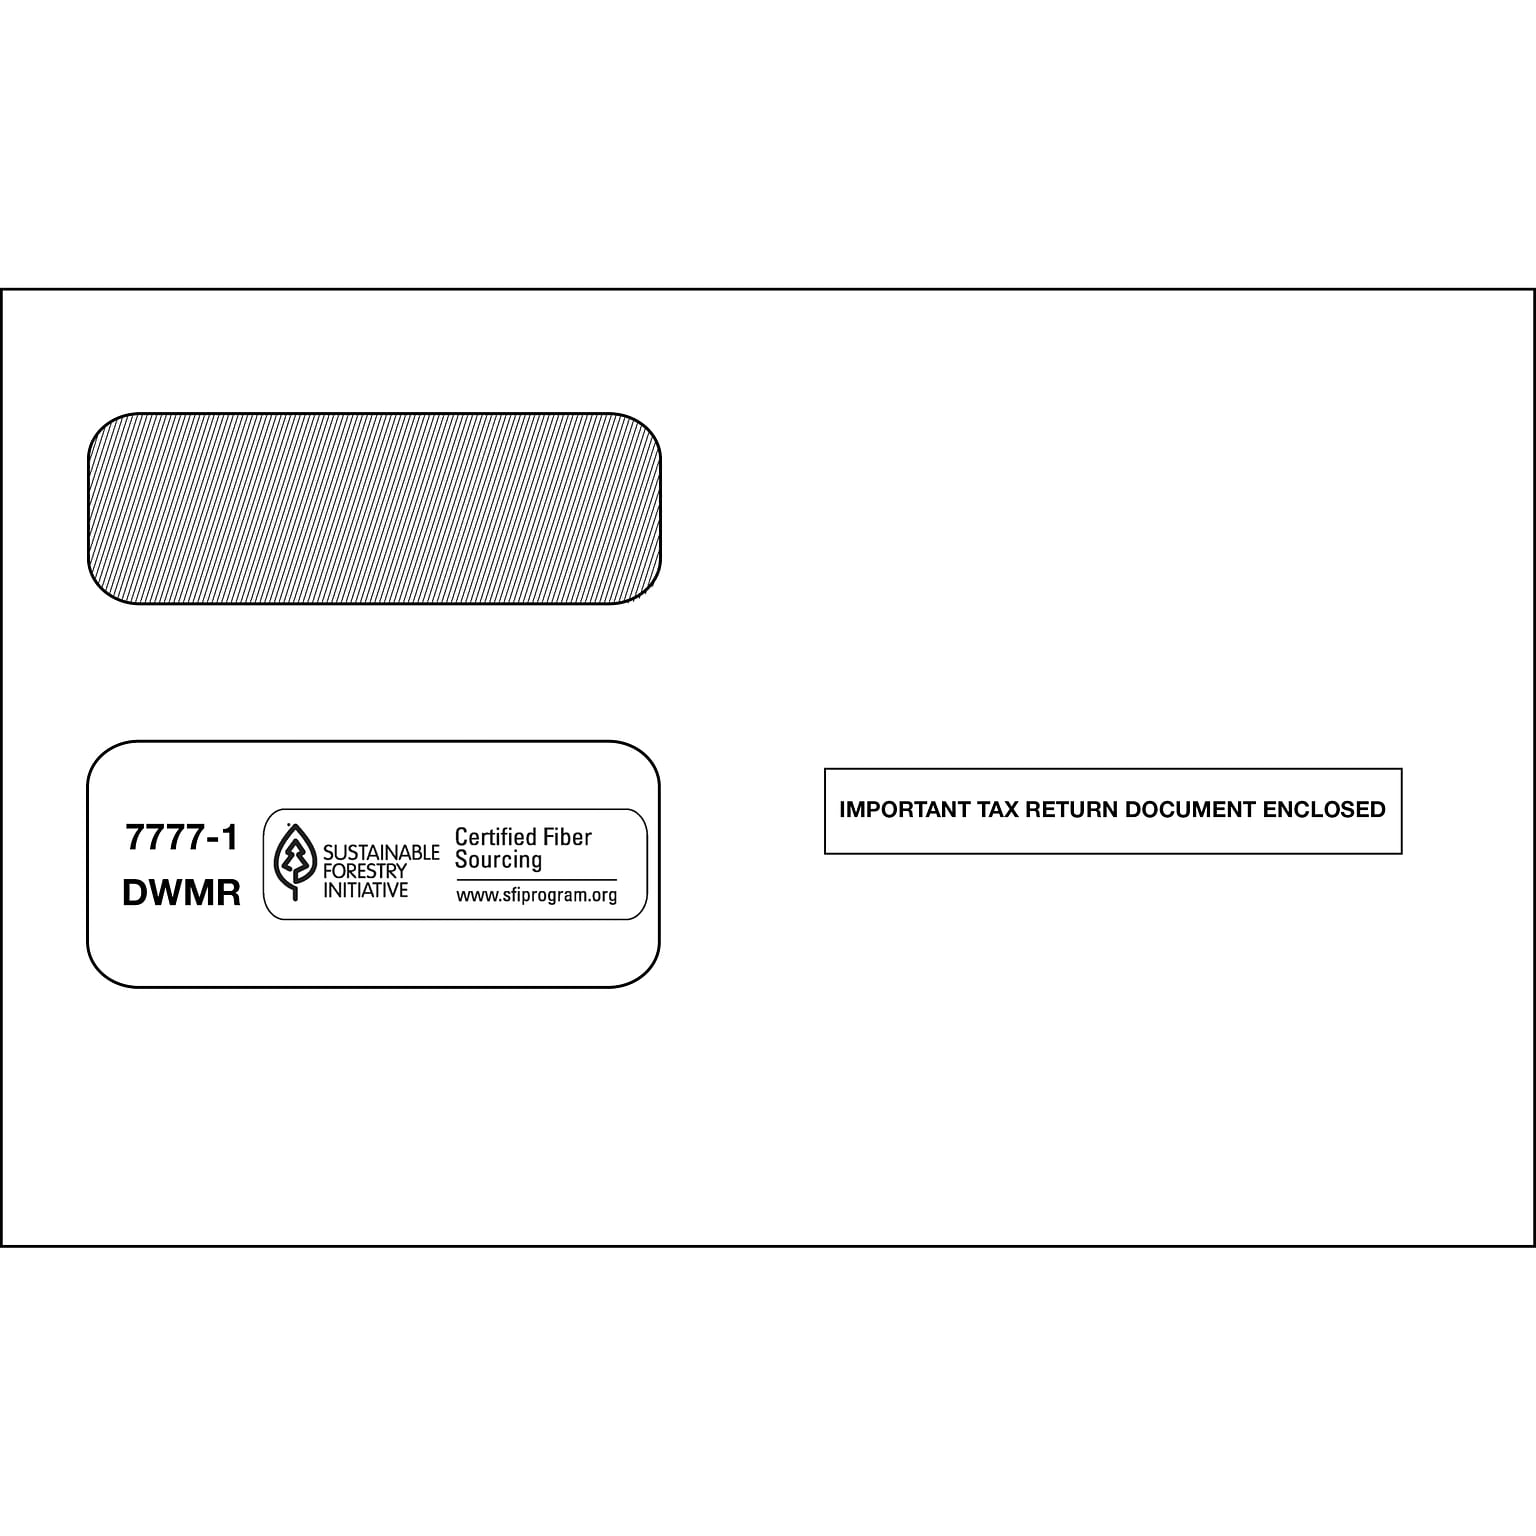 ComplyRight Moistenable Glue Security Tinted Double Window Tax Envelopes, 5 5/8 x 9, 50/Pack (1095BENV50)